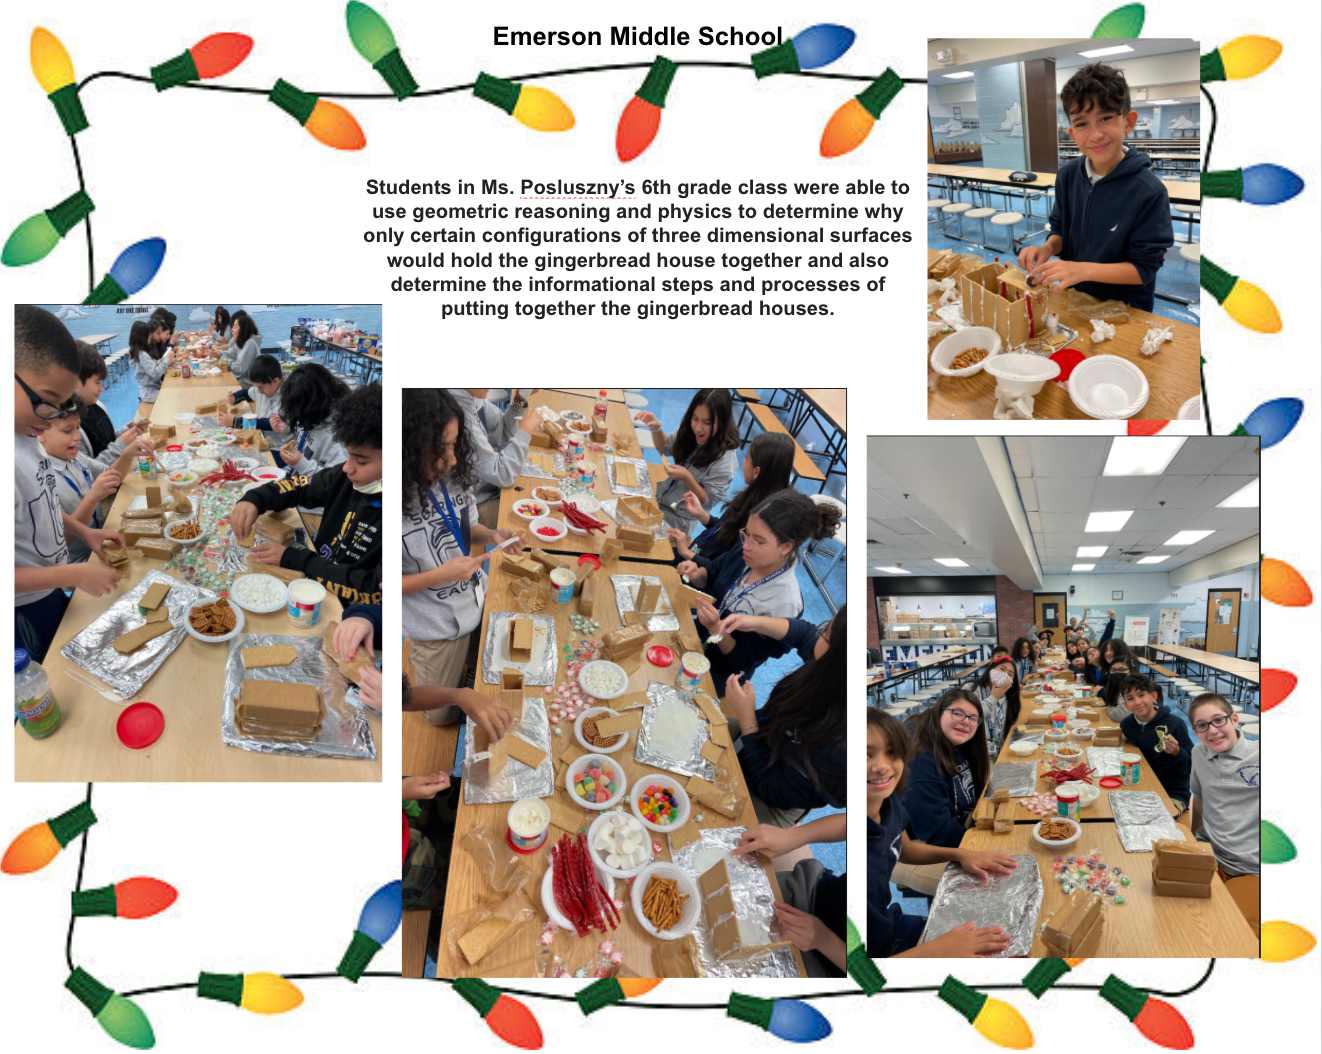 Designing gingerbread houses at the Emerson Middle School